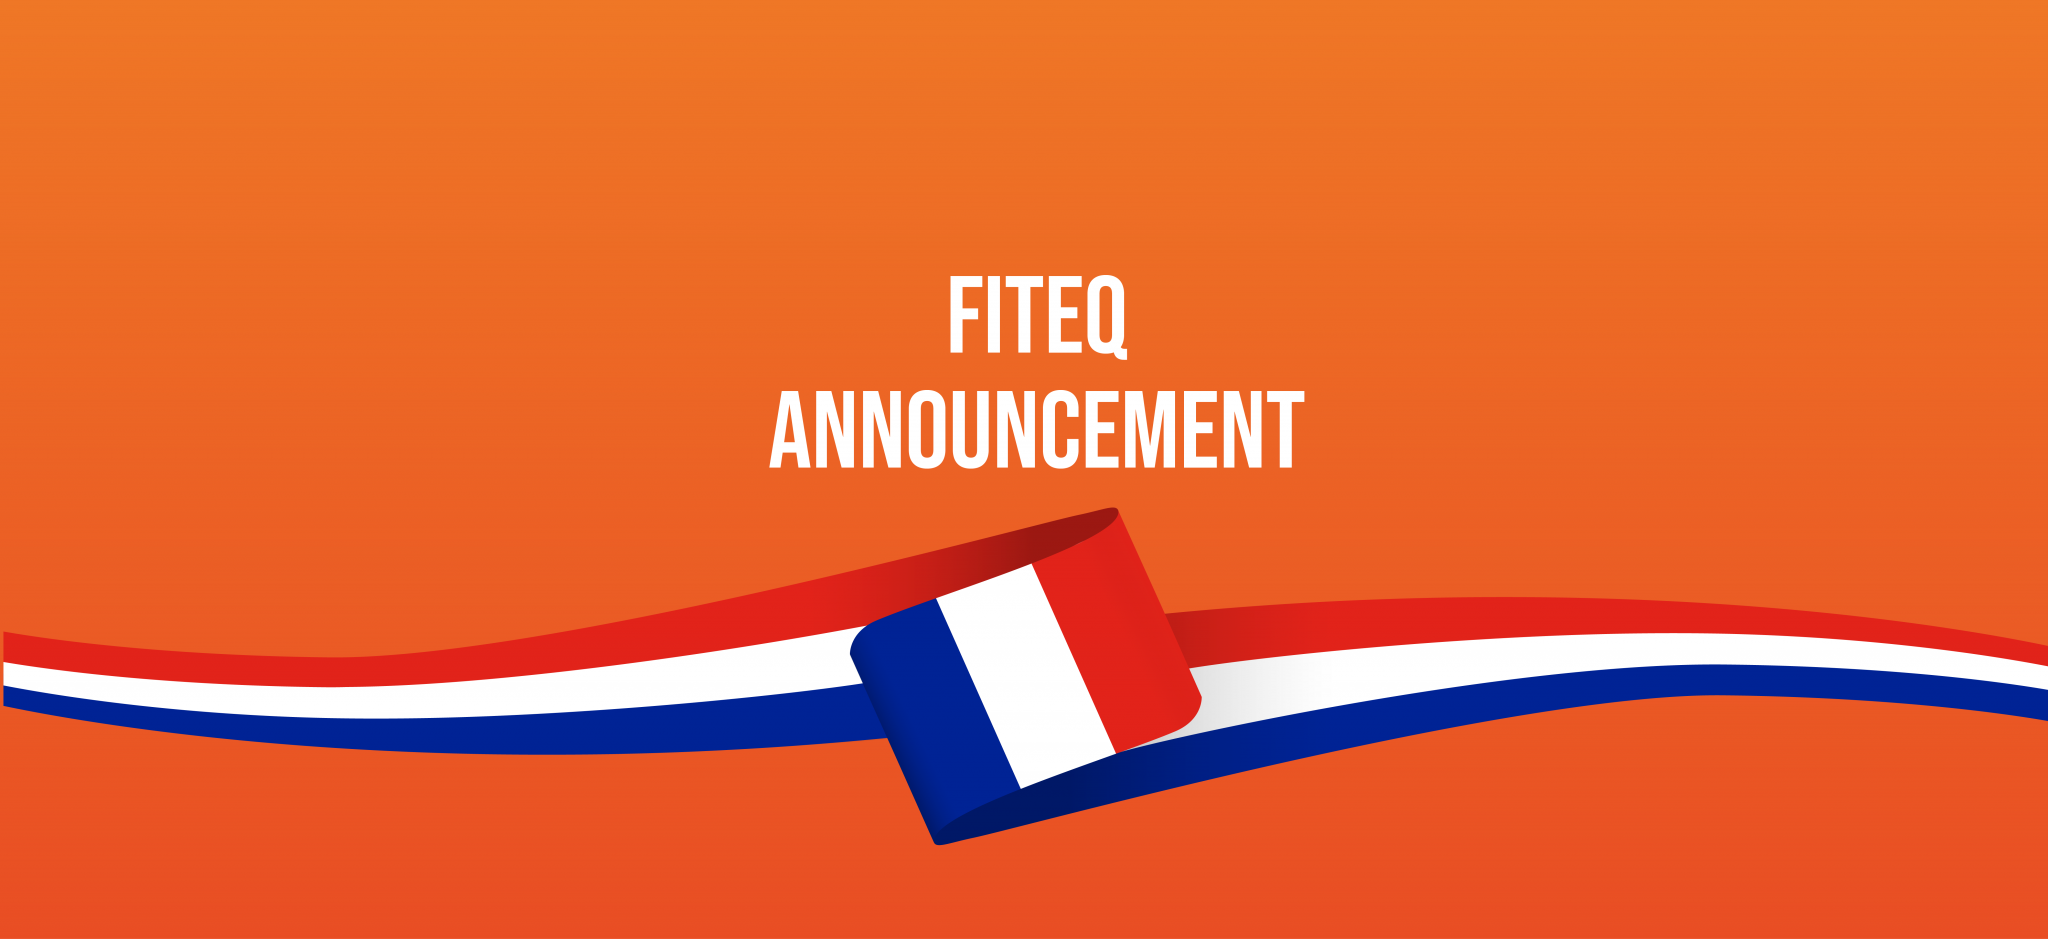 FITEQ launches new French language version of its website